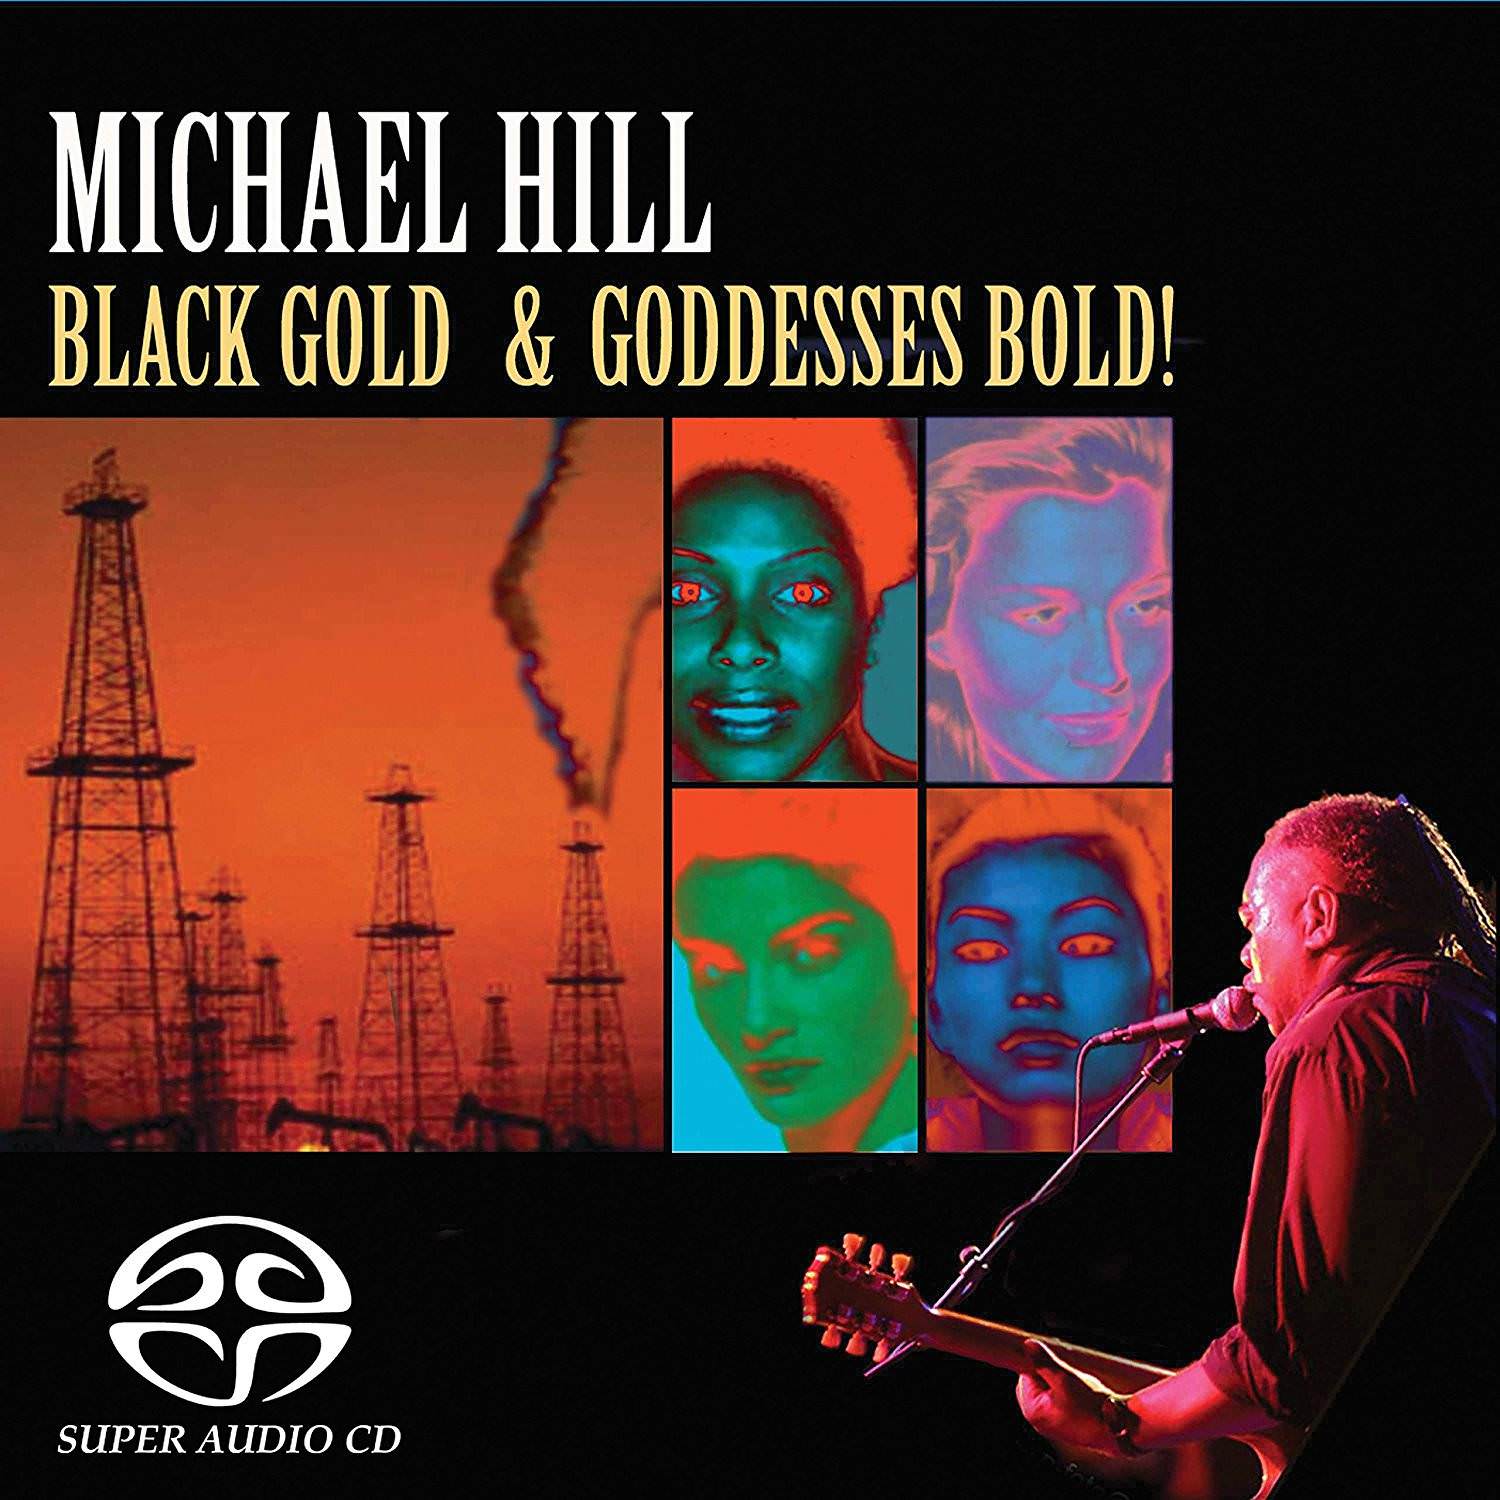 Michael Hill – Black Gold And Goddesses Bold (2005) MCH SACD ISO + Hi-Res FLAC